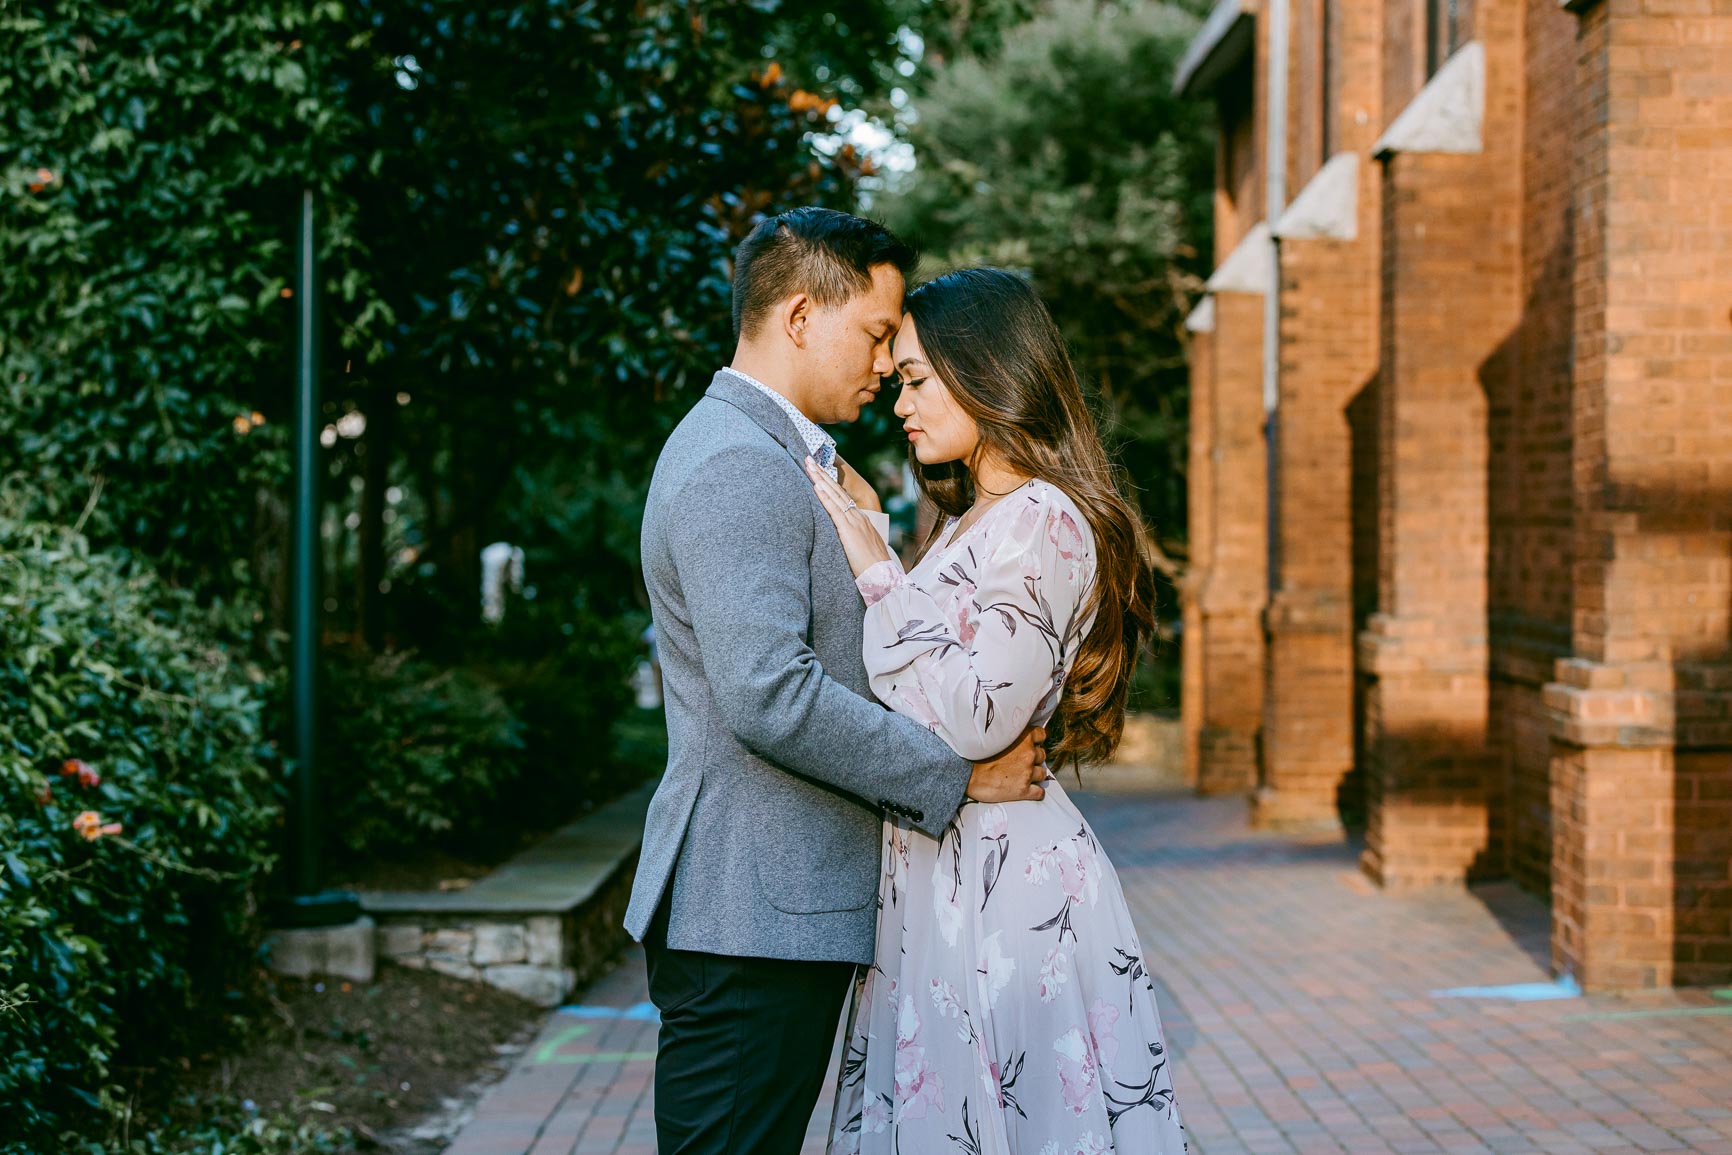 Uptown Charlotte engagement session at The Green shot by Nhieu Tang Photography | nhieutang.com